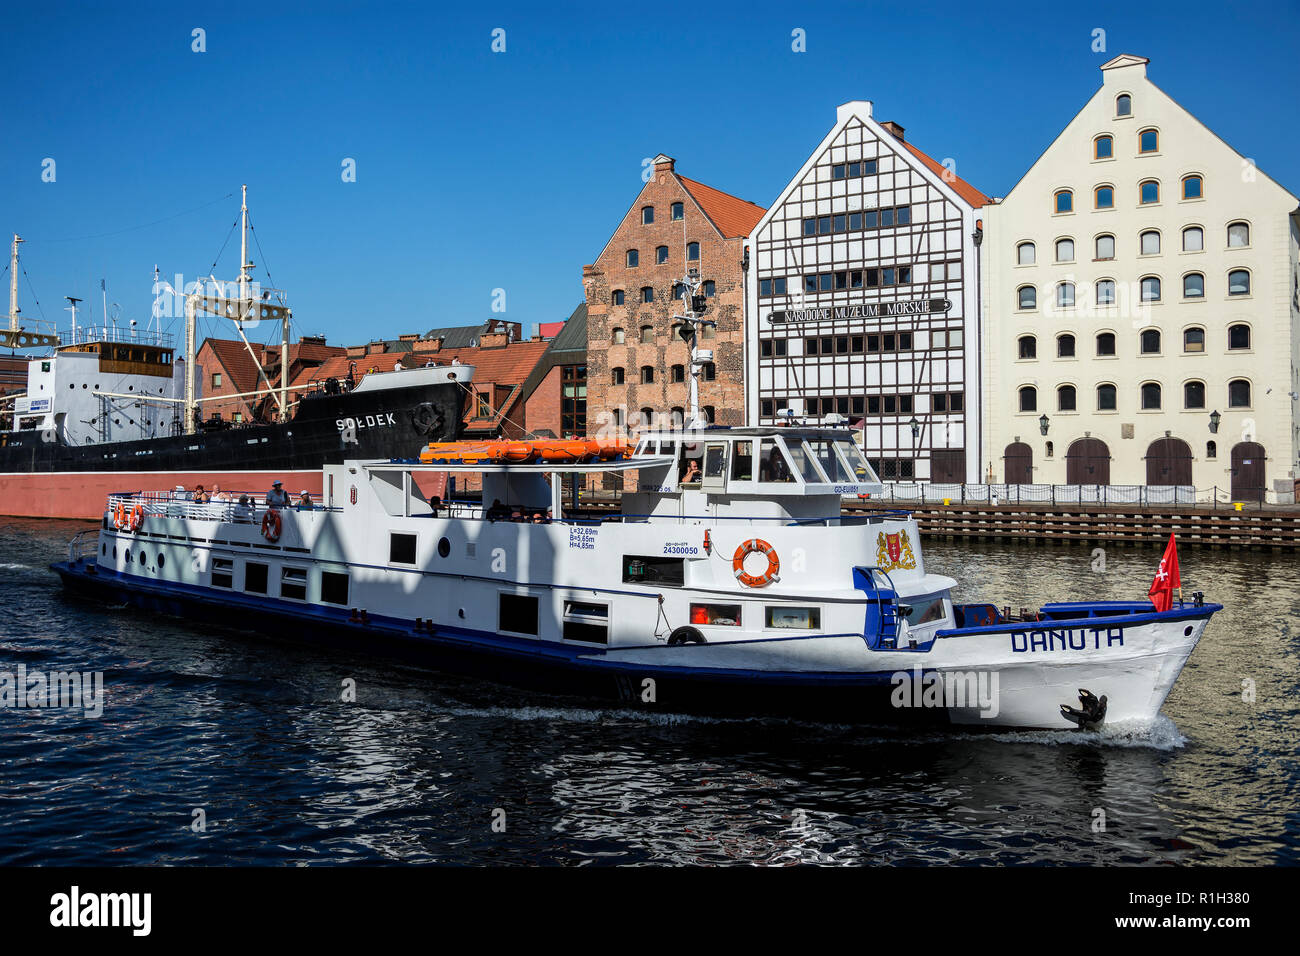 Historic port over  and Old Town with traditional architecture. Danuta ship in the seaport. Narodowe Muzeum Morskie - National Maritime Museum, Gdansk Stock Photo